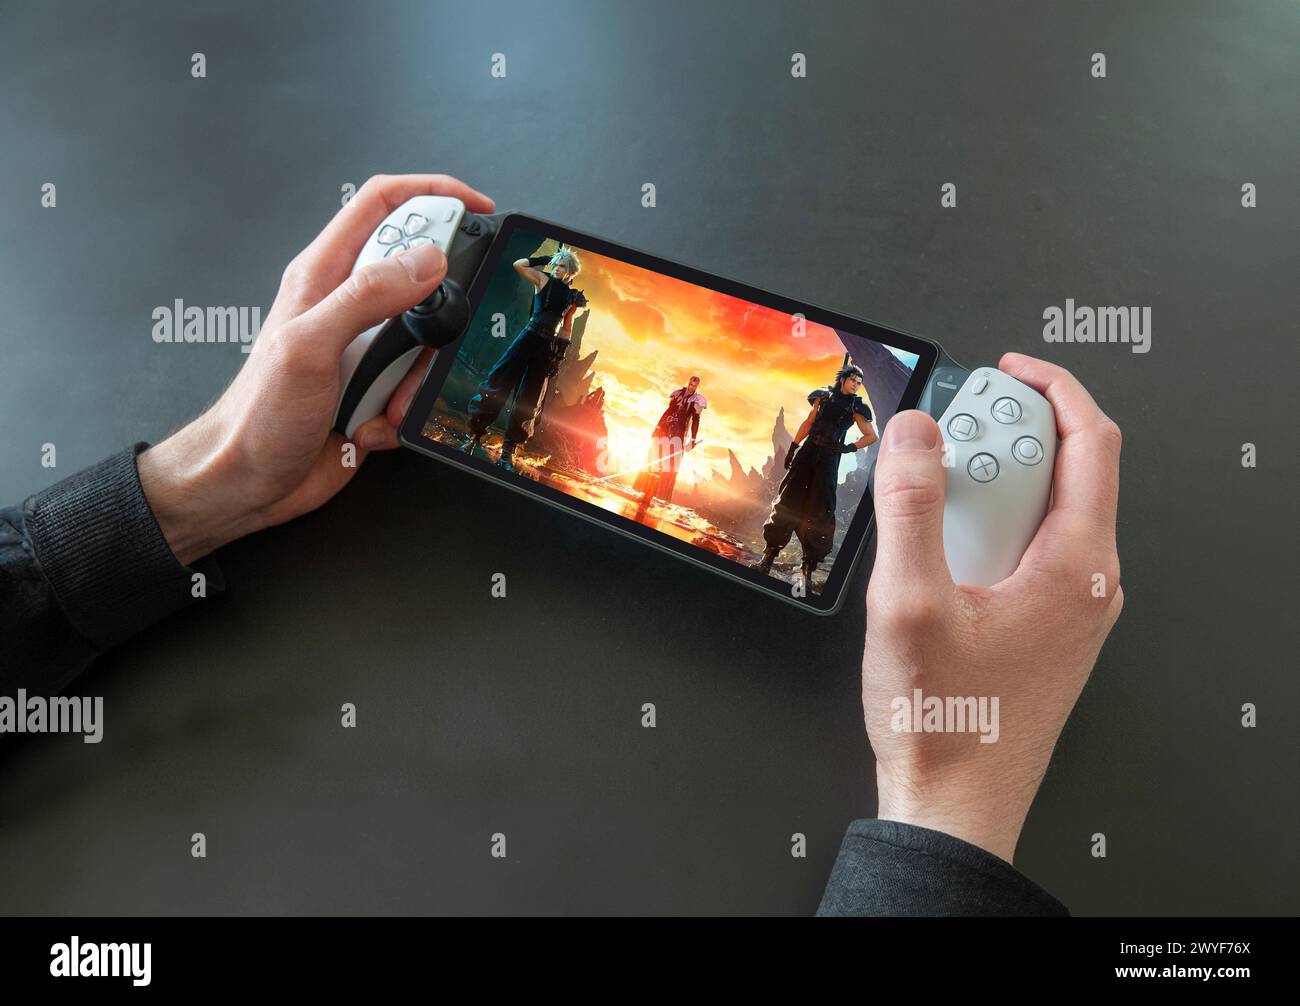 PlayStation Portal Remote Player - handheld gaming accessory for the PlayStation 5 by Sony. Close up of hands of a person playing Final Fantasy 7 Rebi Stock Photo